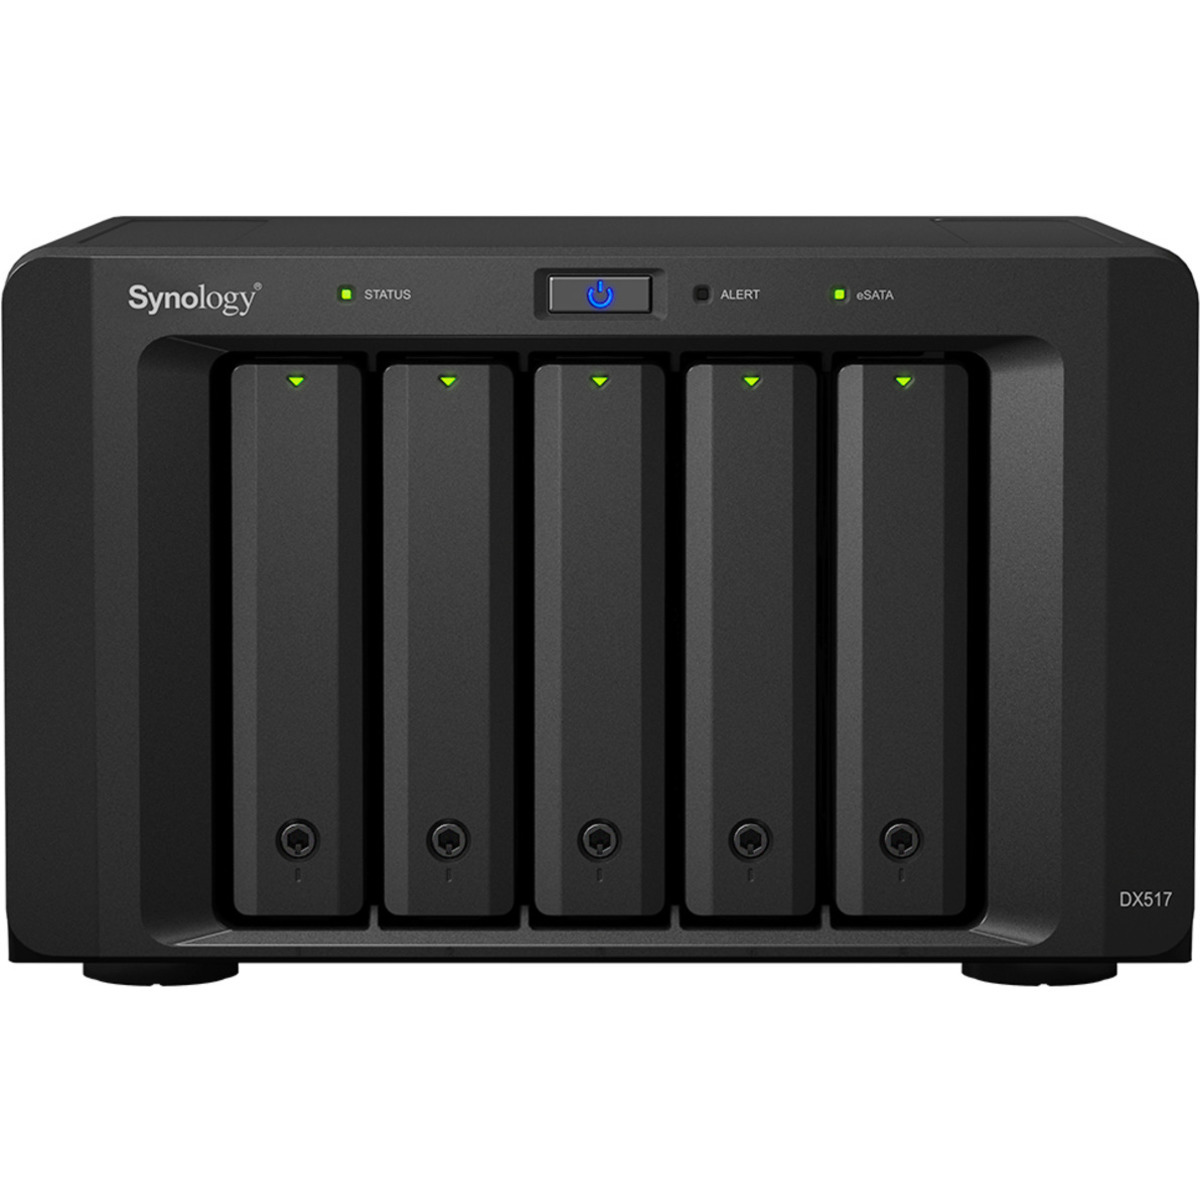 Synology DX517 External Expansion Drive 24tb 5-Bay Desktop Multimedia / Power User / Business Expansion Enclosure 3x8tb Seagate EXOS 7E10 ST8000NM017B 3.5 7200rpm SATA 6Gb/s HDD ENTERPRISE Class Drives Installed - Burn-In Tested DX517 External Expansion Drive